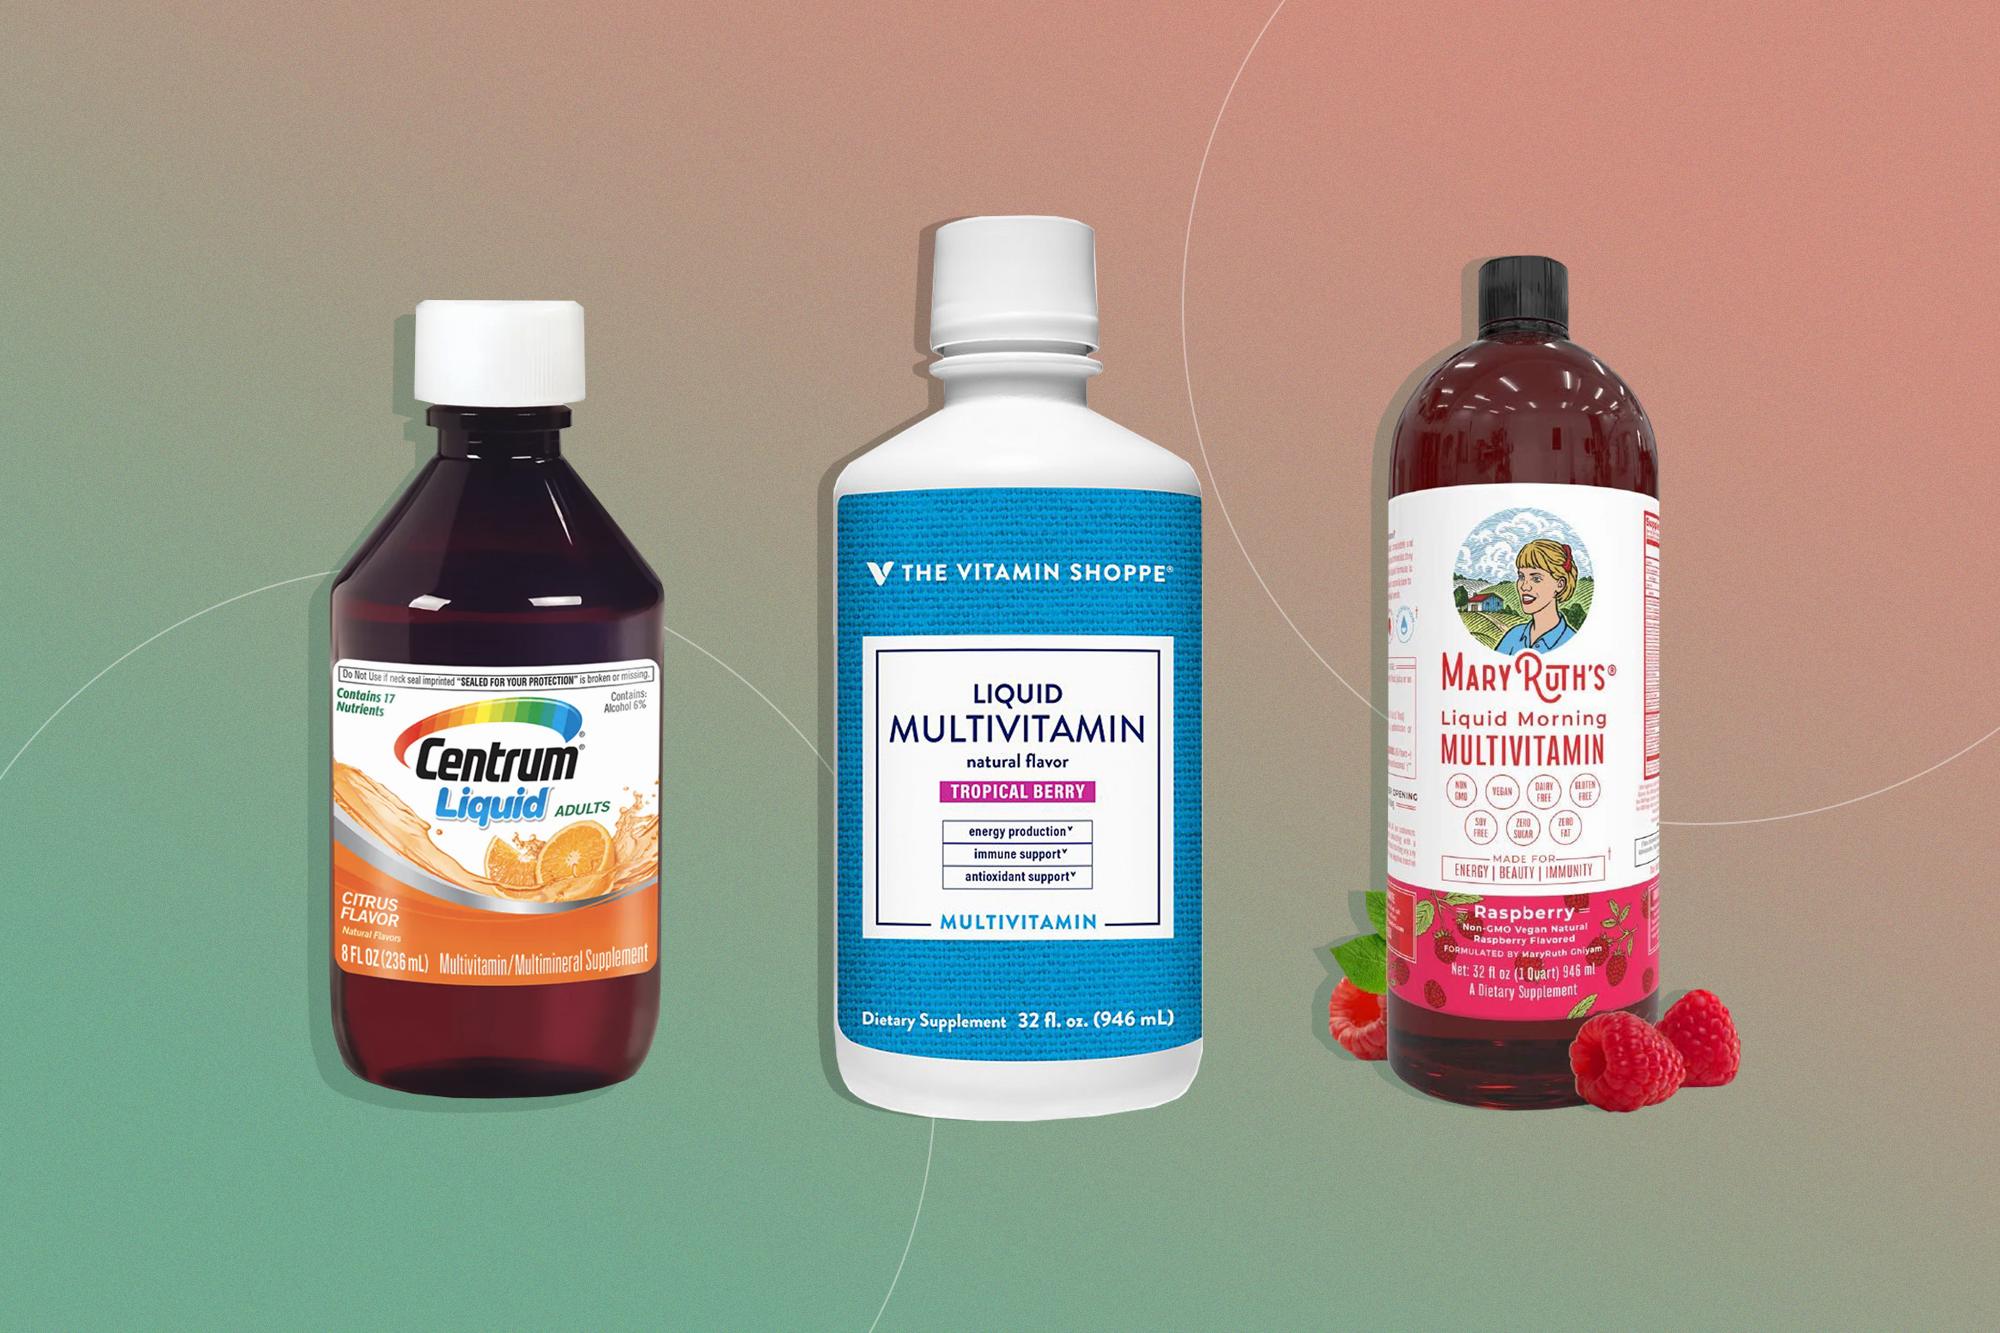 Three bottles of liquid multivitamins in citrus, tropical berry, and raspberry flavors.